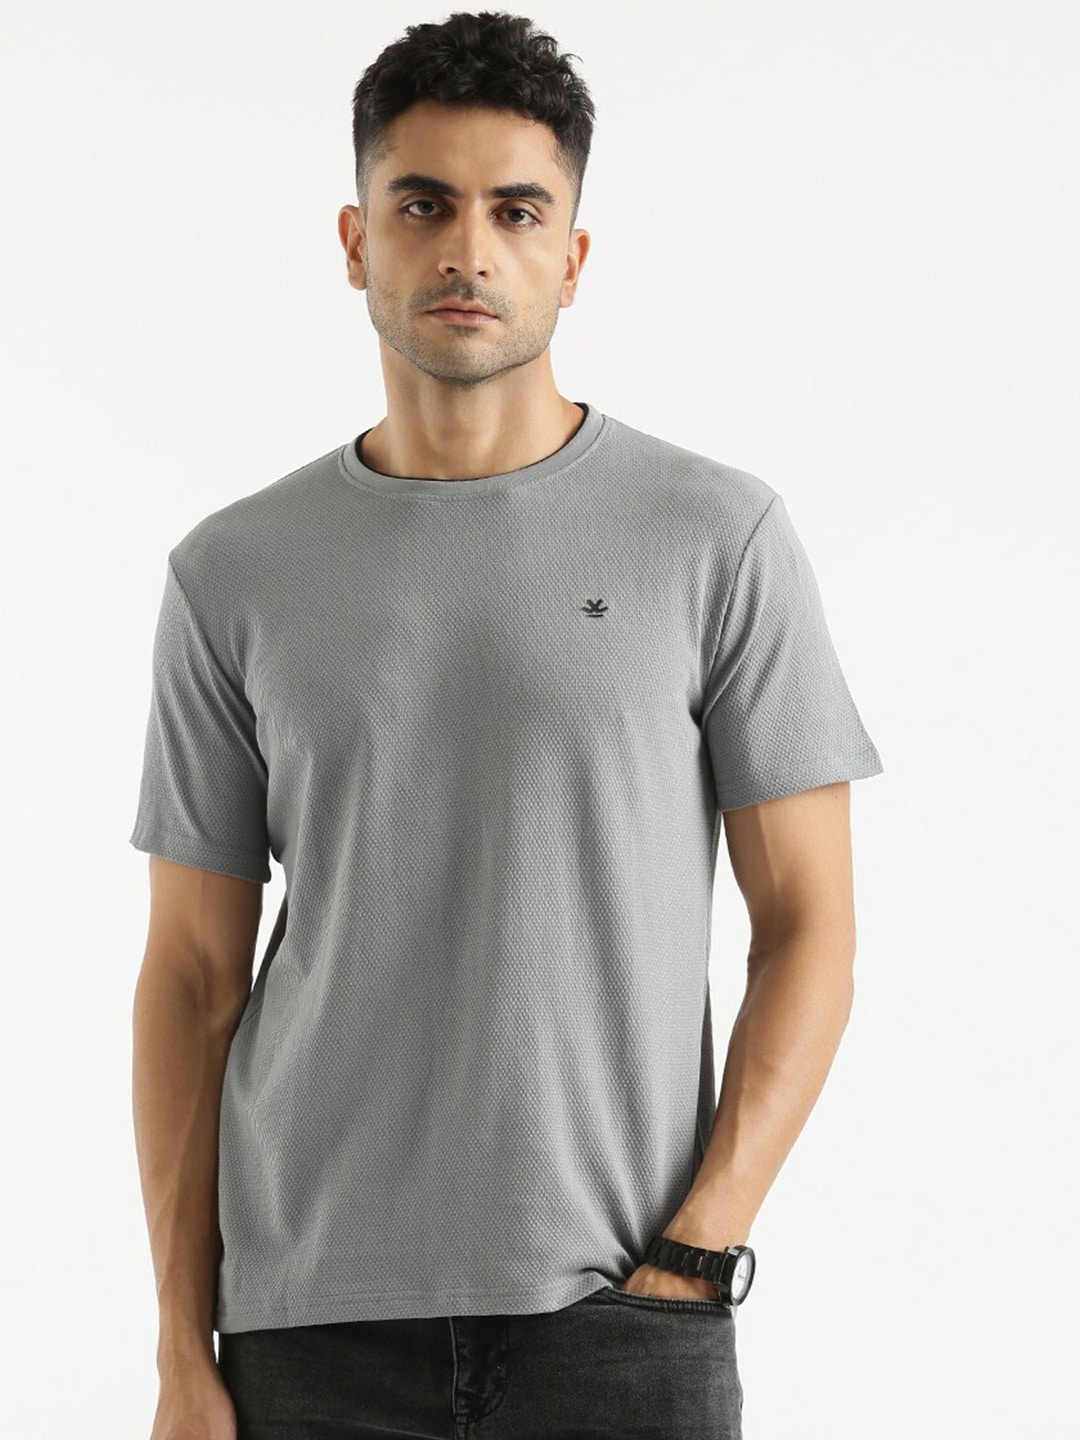 WROGN Slim Fit Round Neck Short Sleeves Cotton T-shirt